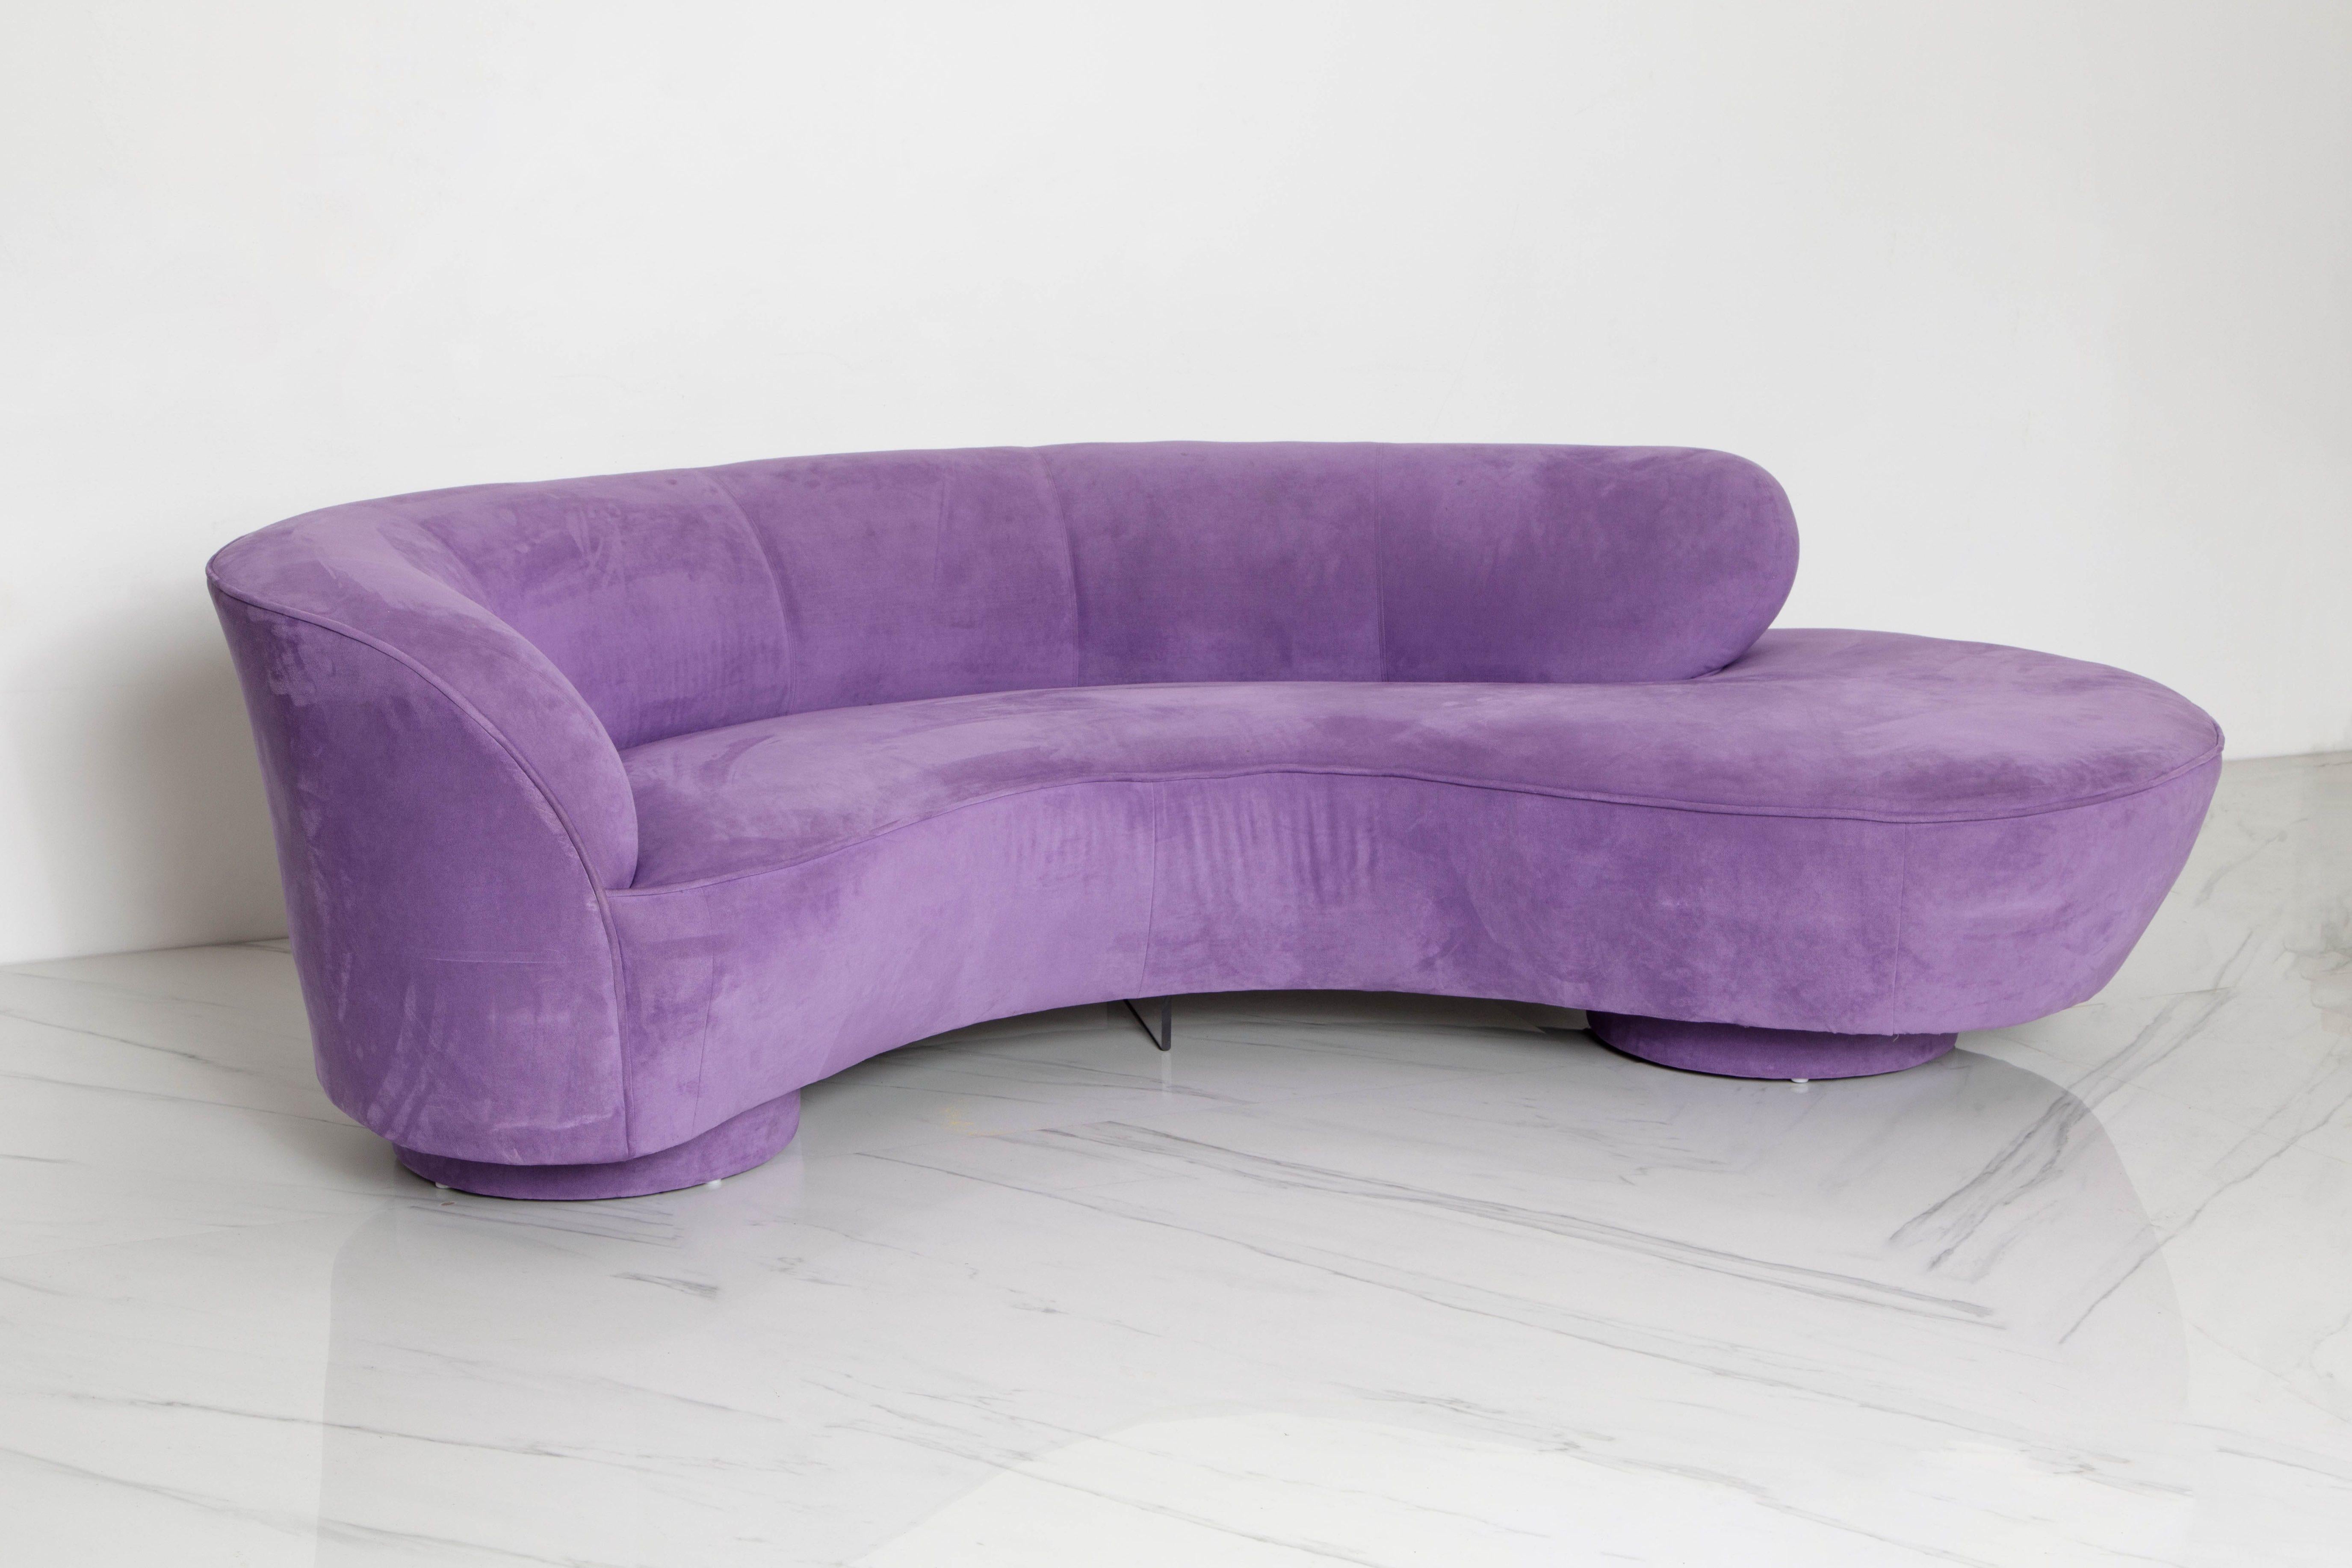 American 'Cloud' Sofa by Vladimir Kagan for Directional w Lucite Leg, 1980s, Signed